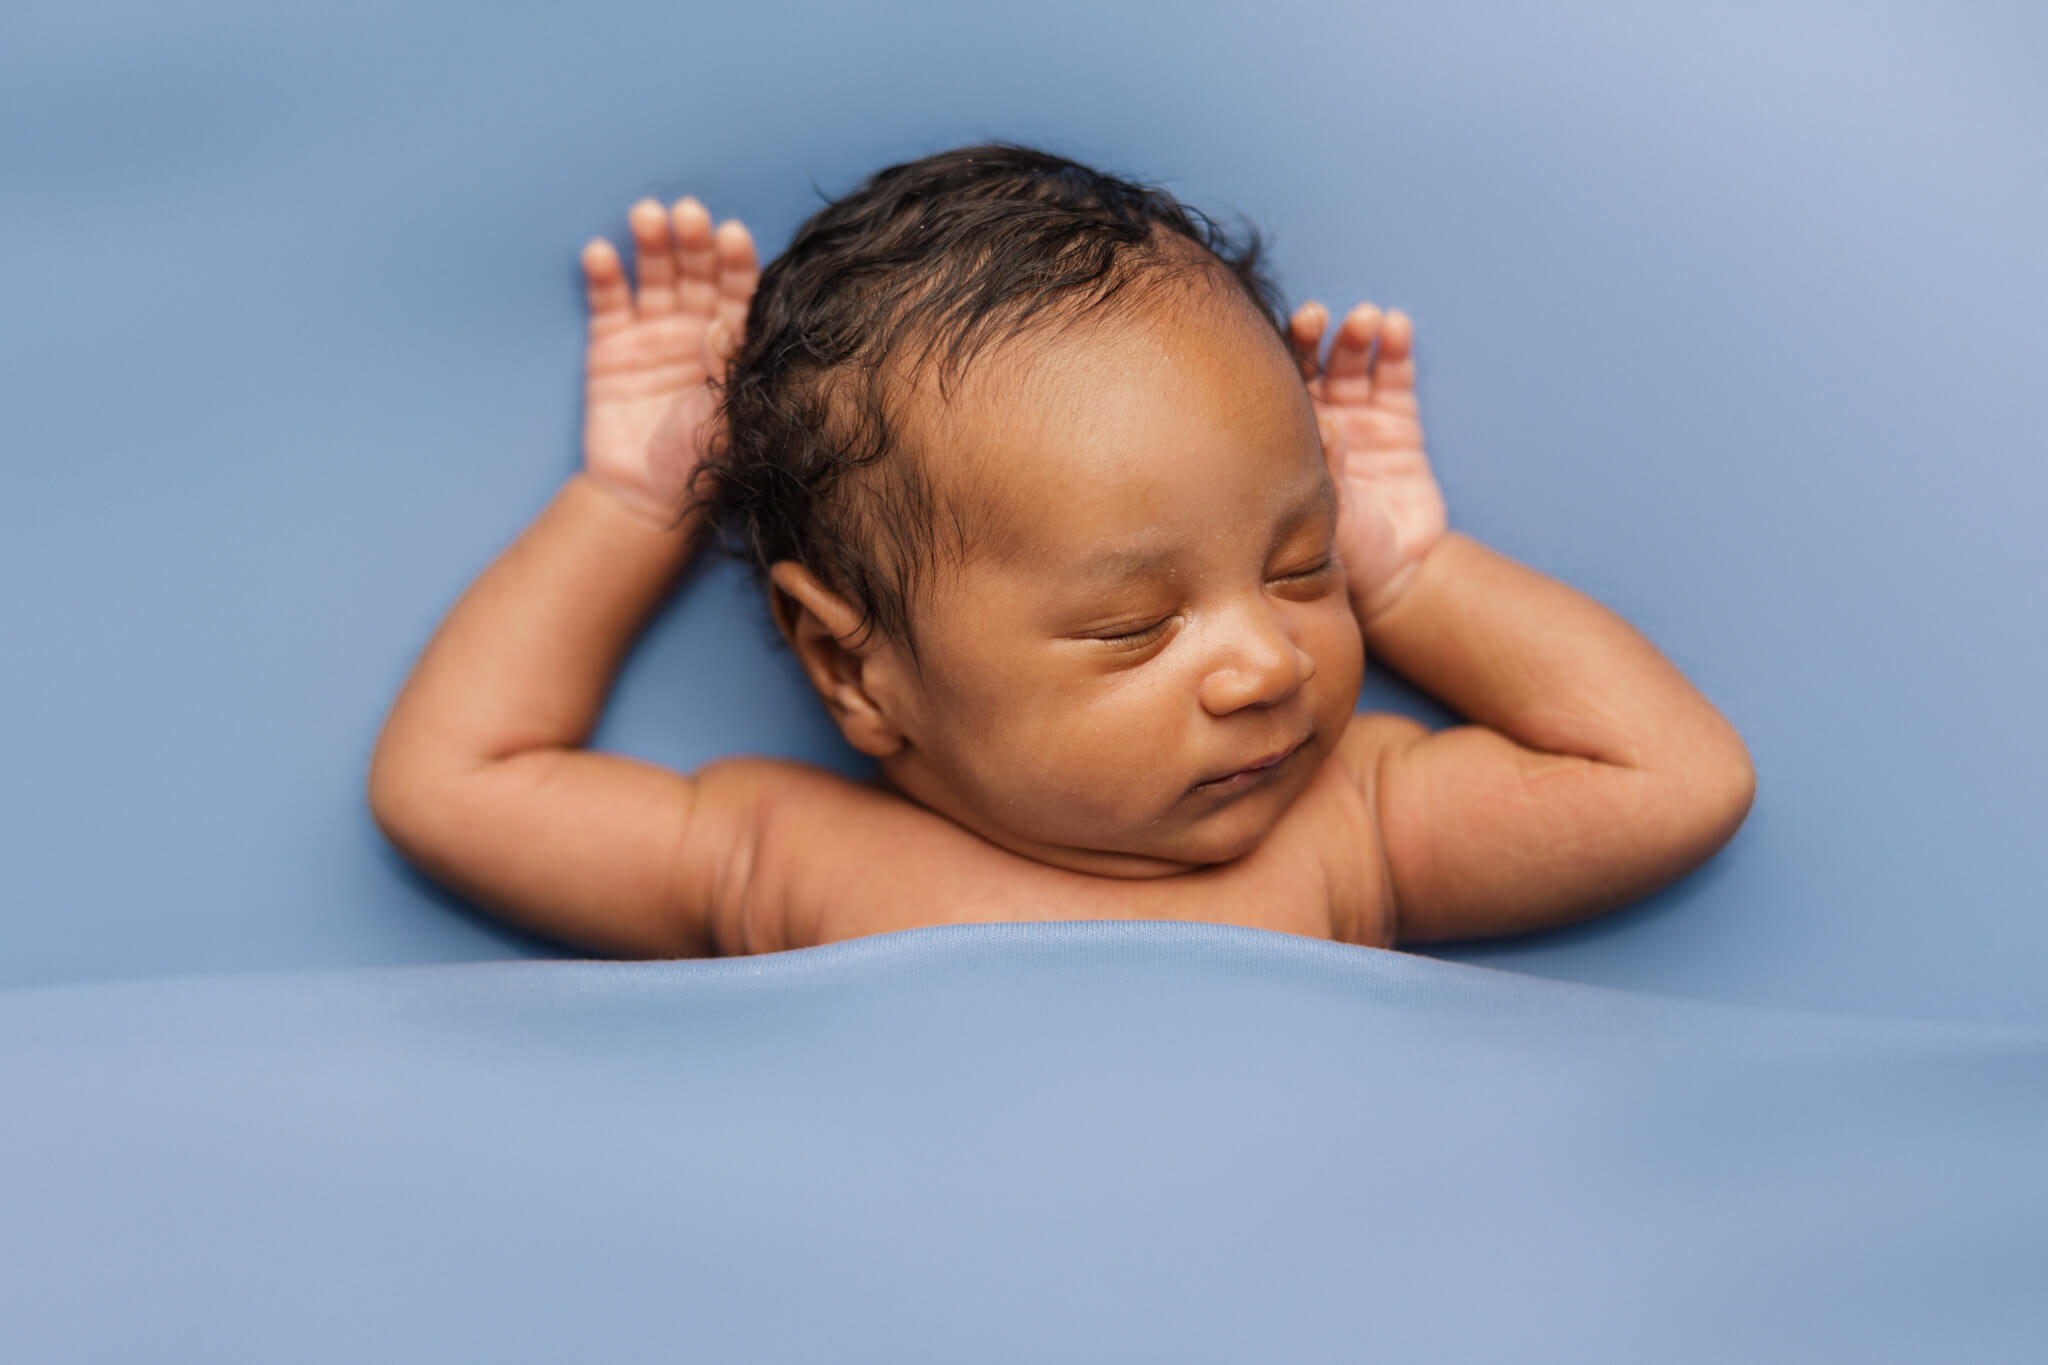 Newborn baby relaxing during his newborn session in the studio with molly berry photography.
Magnolia Chiropractic.